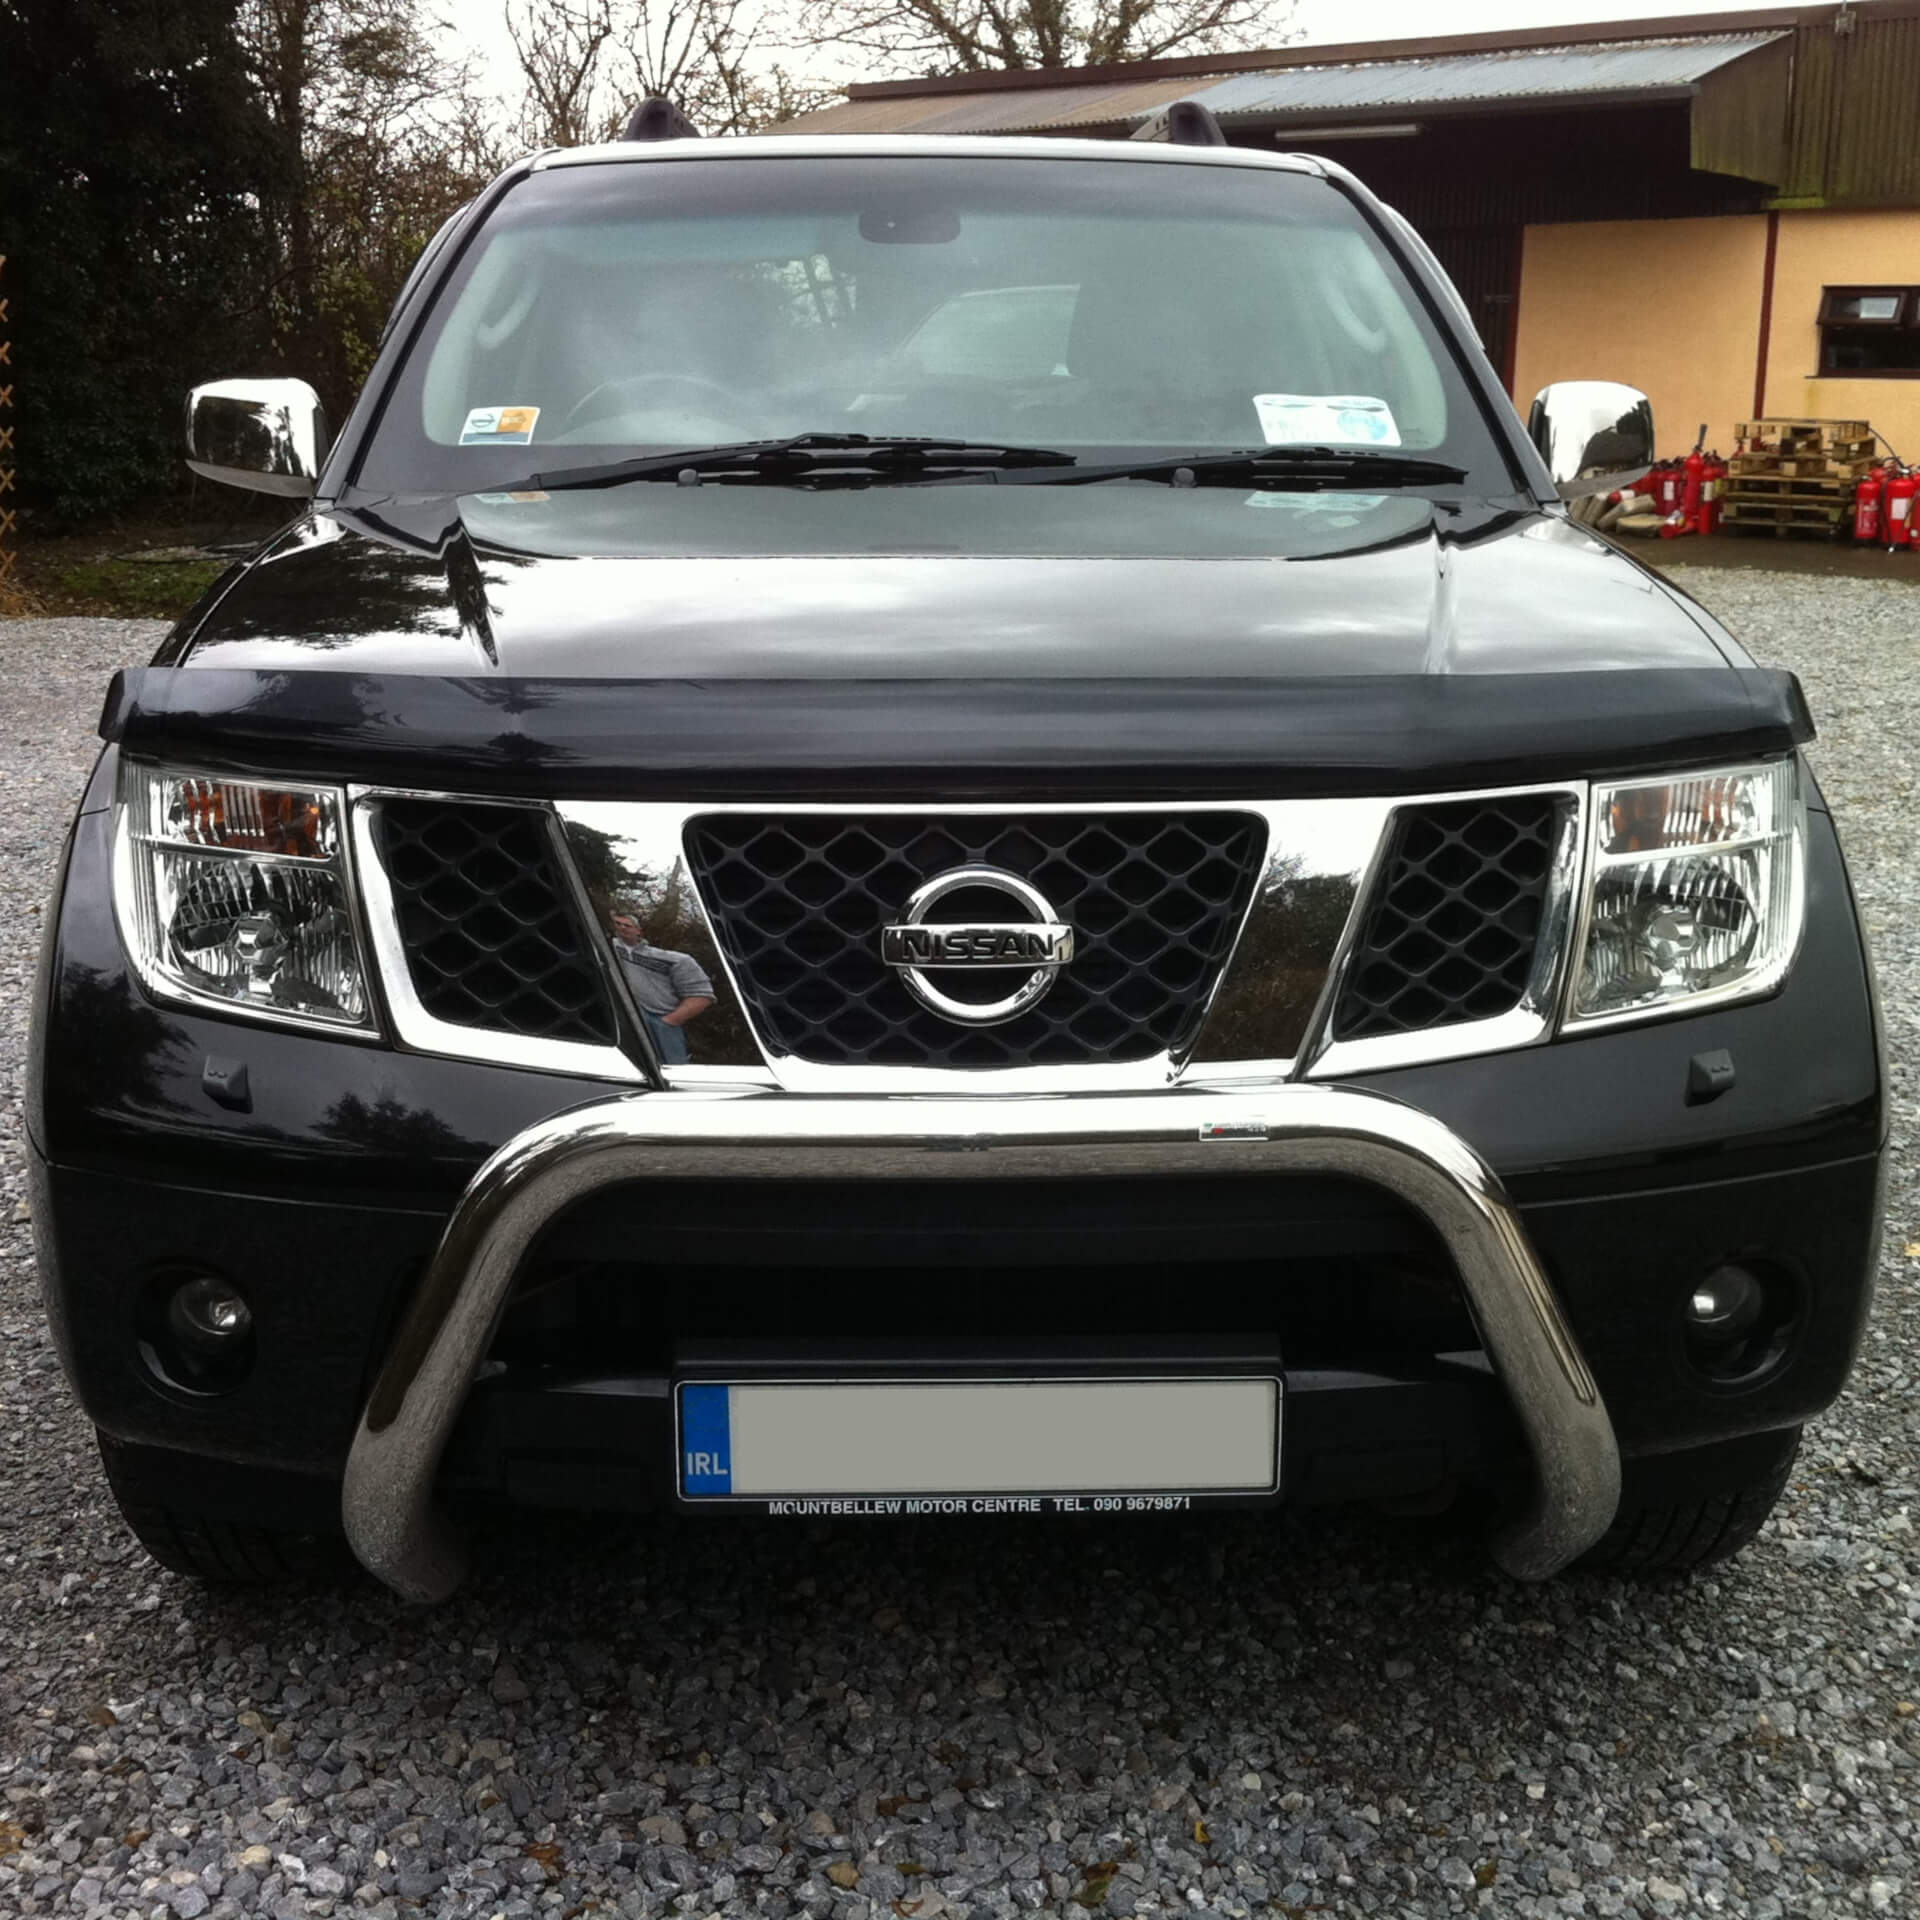 Direct4x4 accessories for Nissan Pathfinder vehicles with a photo of the front of a Nissan Pathfinder parked on gravel